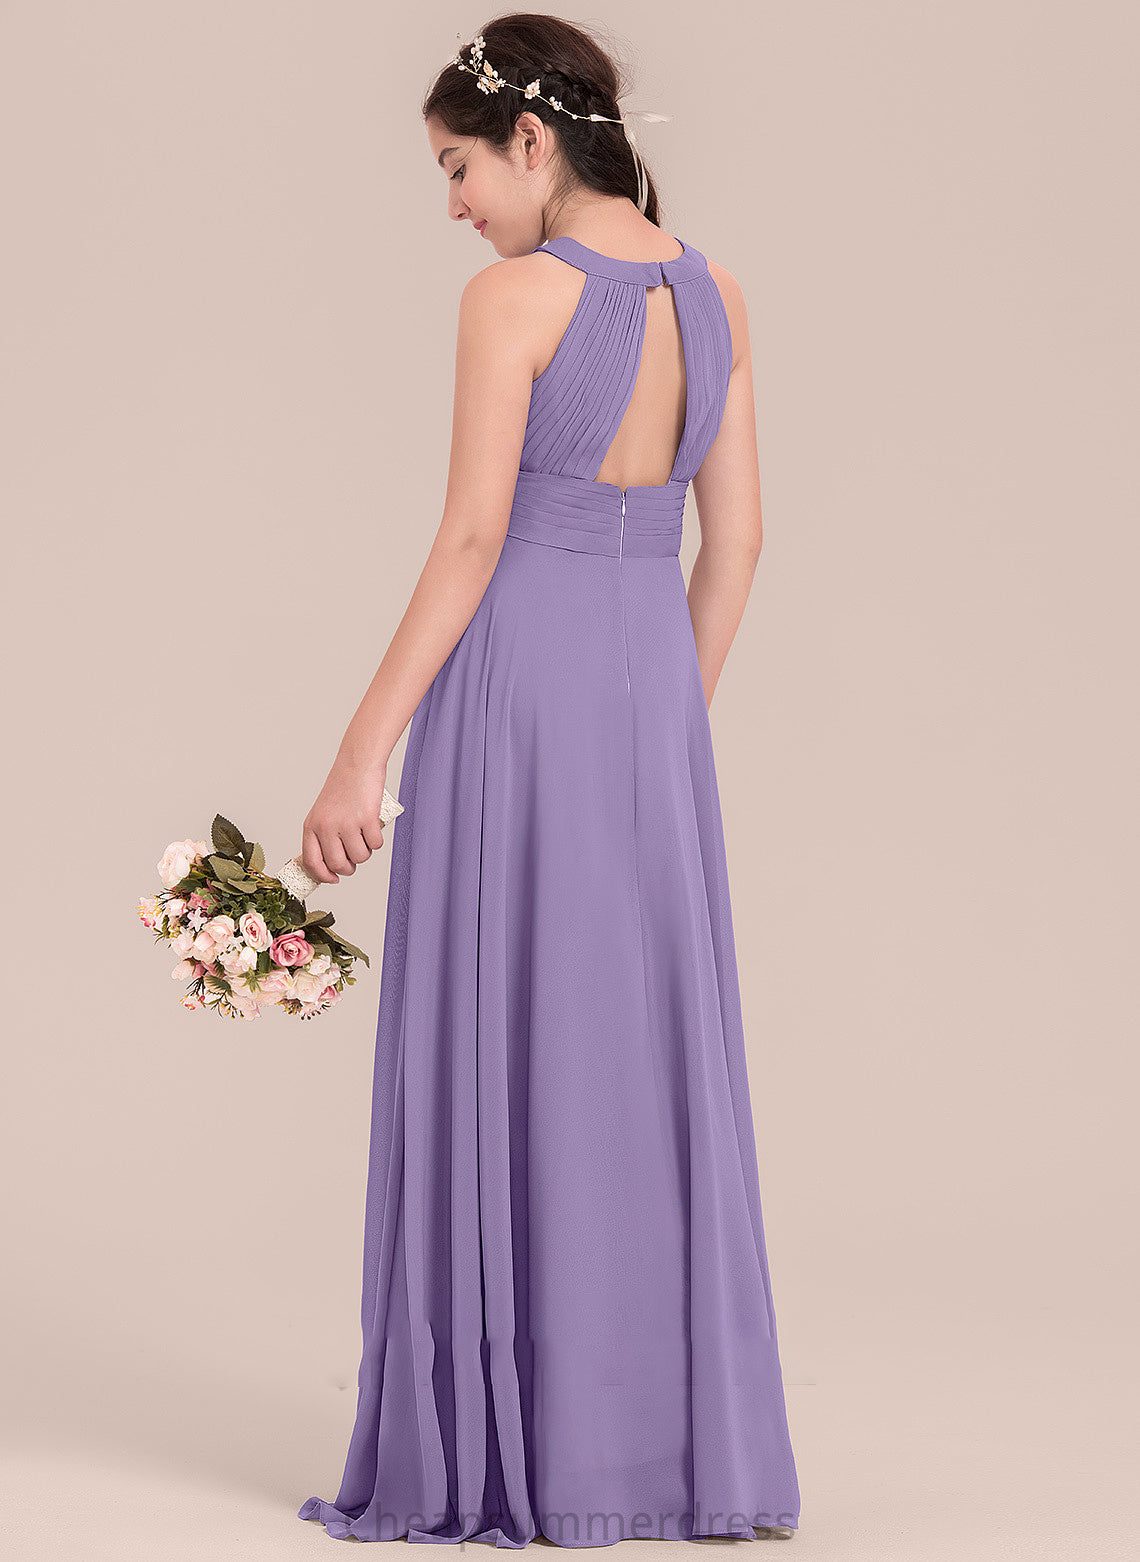 Scoop Neck Chiffon Ruffle With A-Line Junior Bridesmaid Dresses Floor-Length Maggie